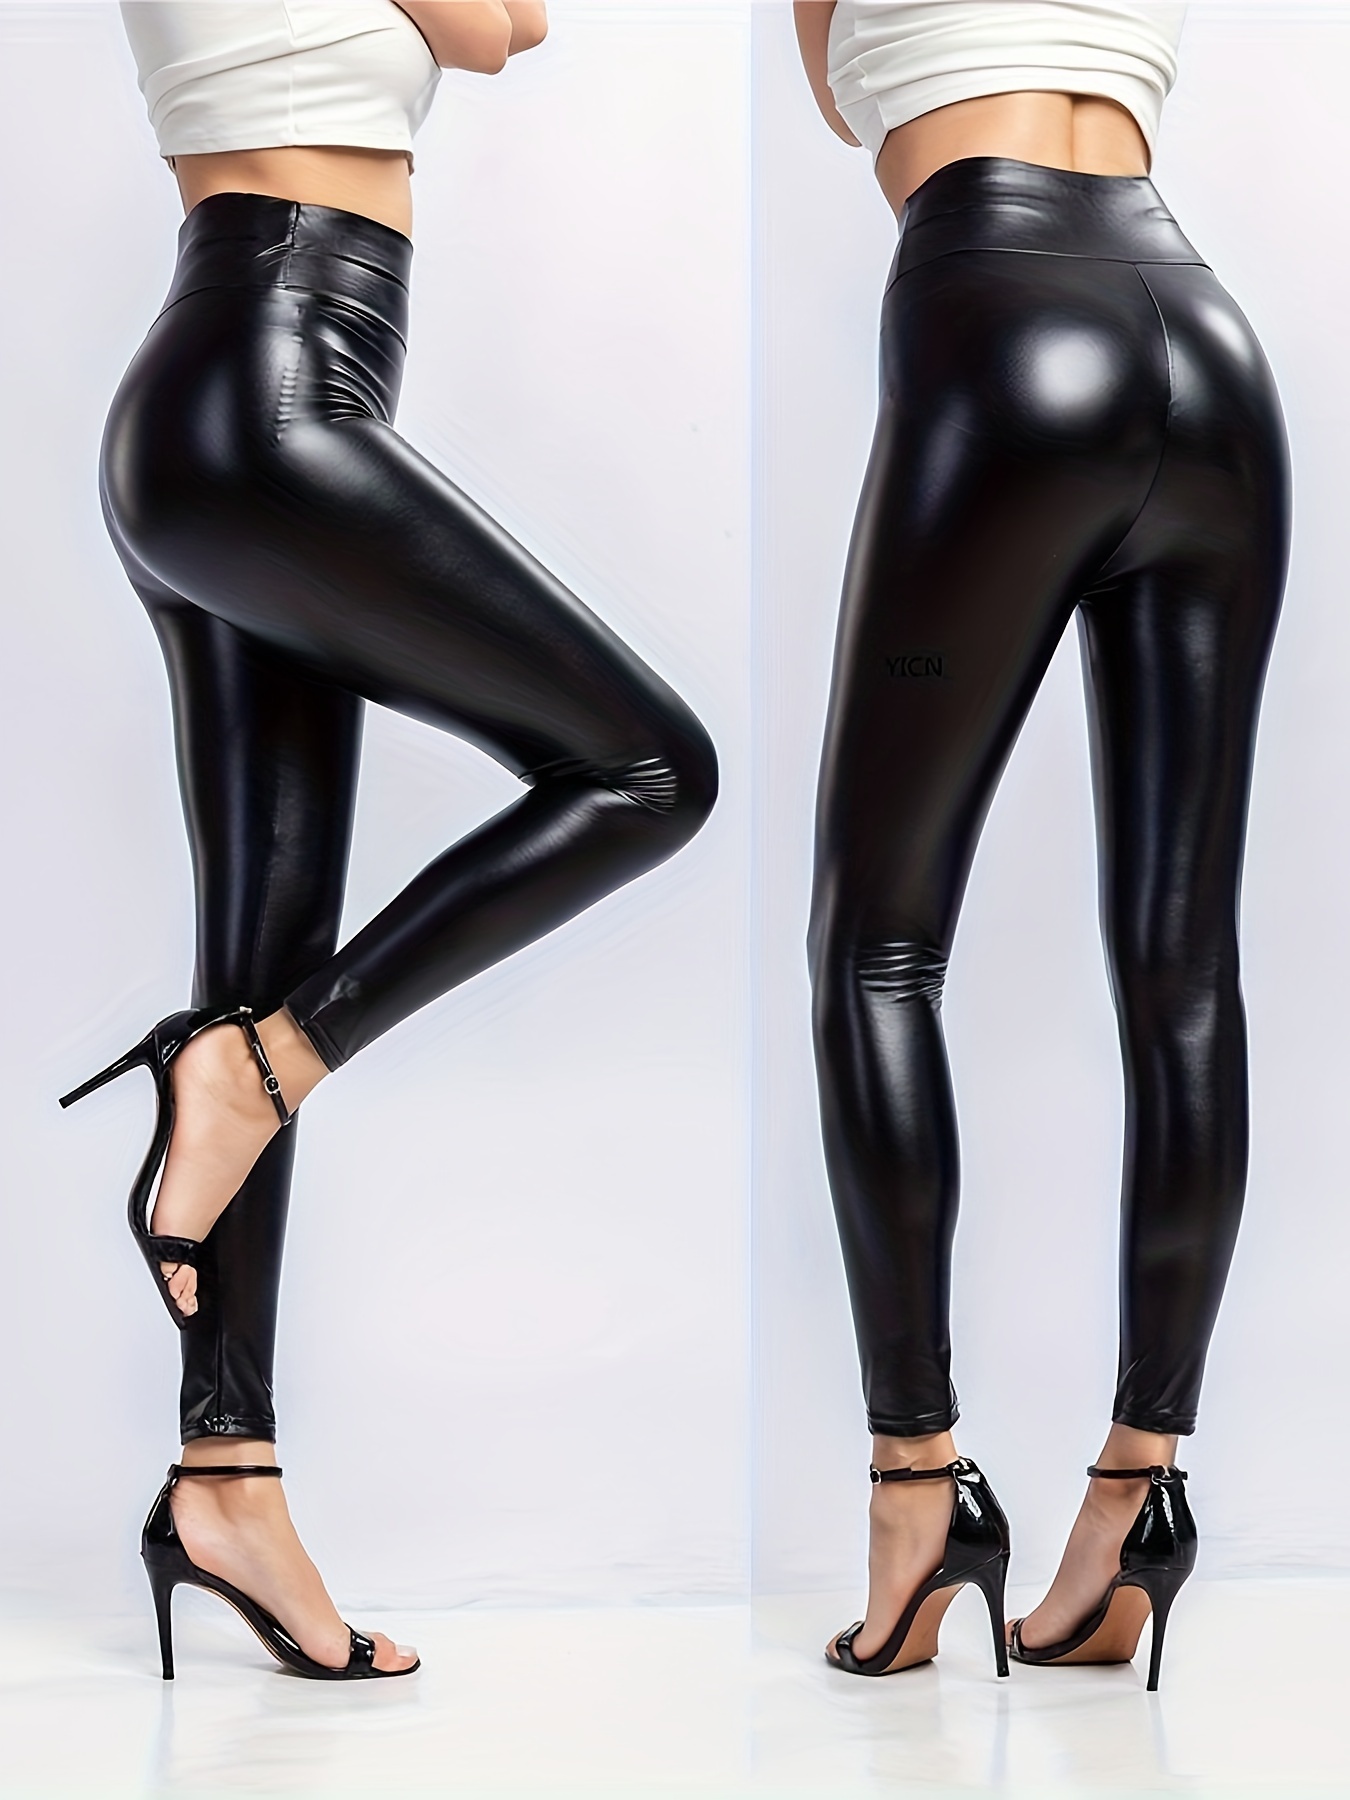 Womens Fitness Workout Pants Patent Leather Leggings Lady Shiny